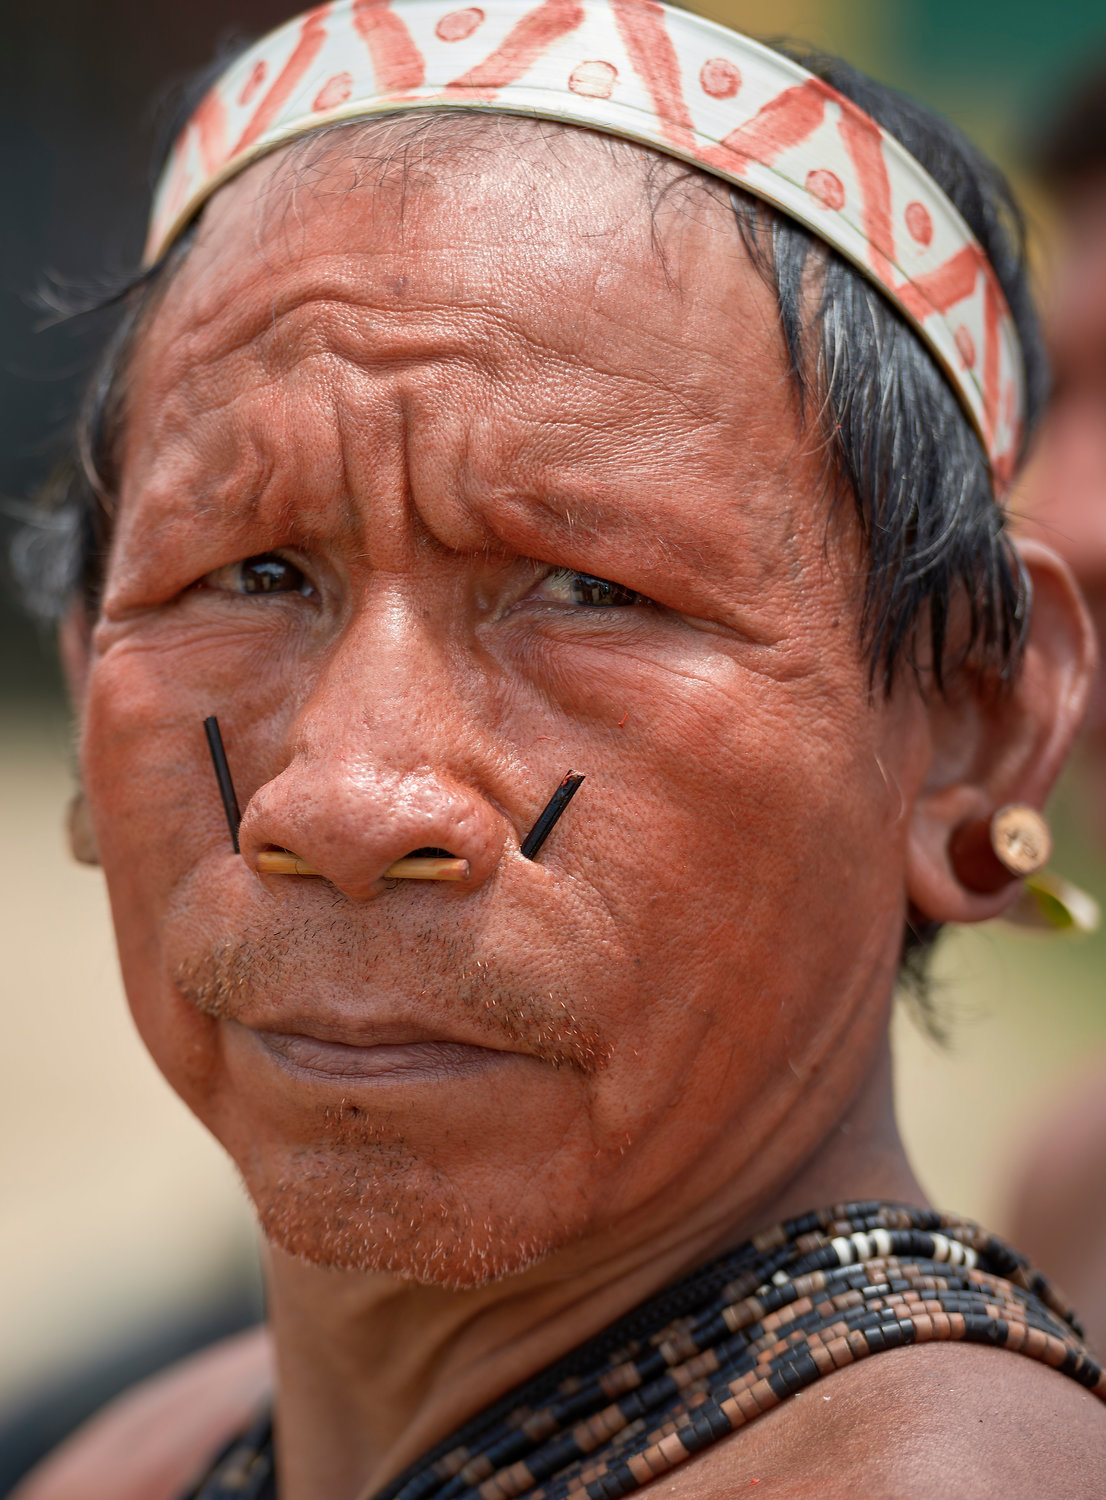 His face painted red with urucum, a man participates in a march by indigenous people through the streets of Atalaia do Norte in Brazil's Amazon region March 27, 2019. The Vatican released Pope Francis' postsynodal apostolic exhortation, "Querida Amazonia" (Beloved Amazonia), Feb. 12, 2020.